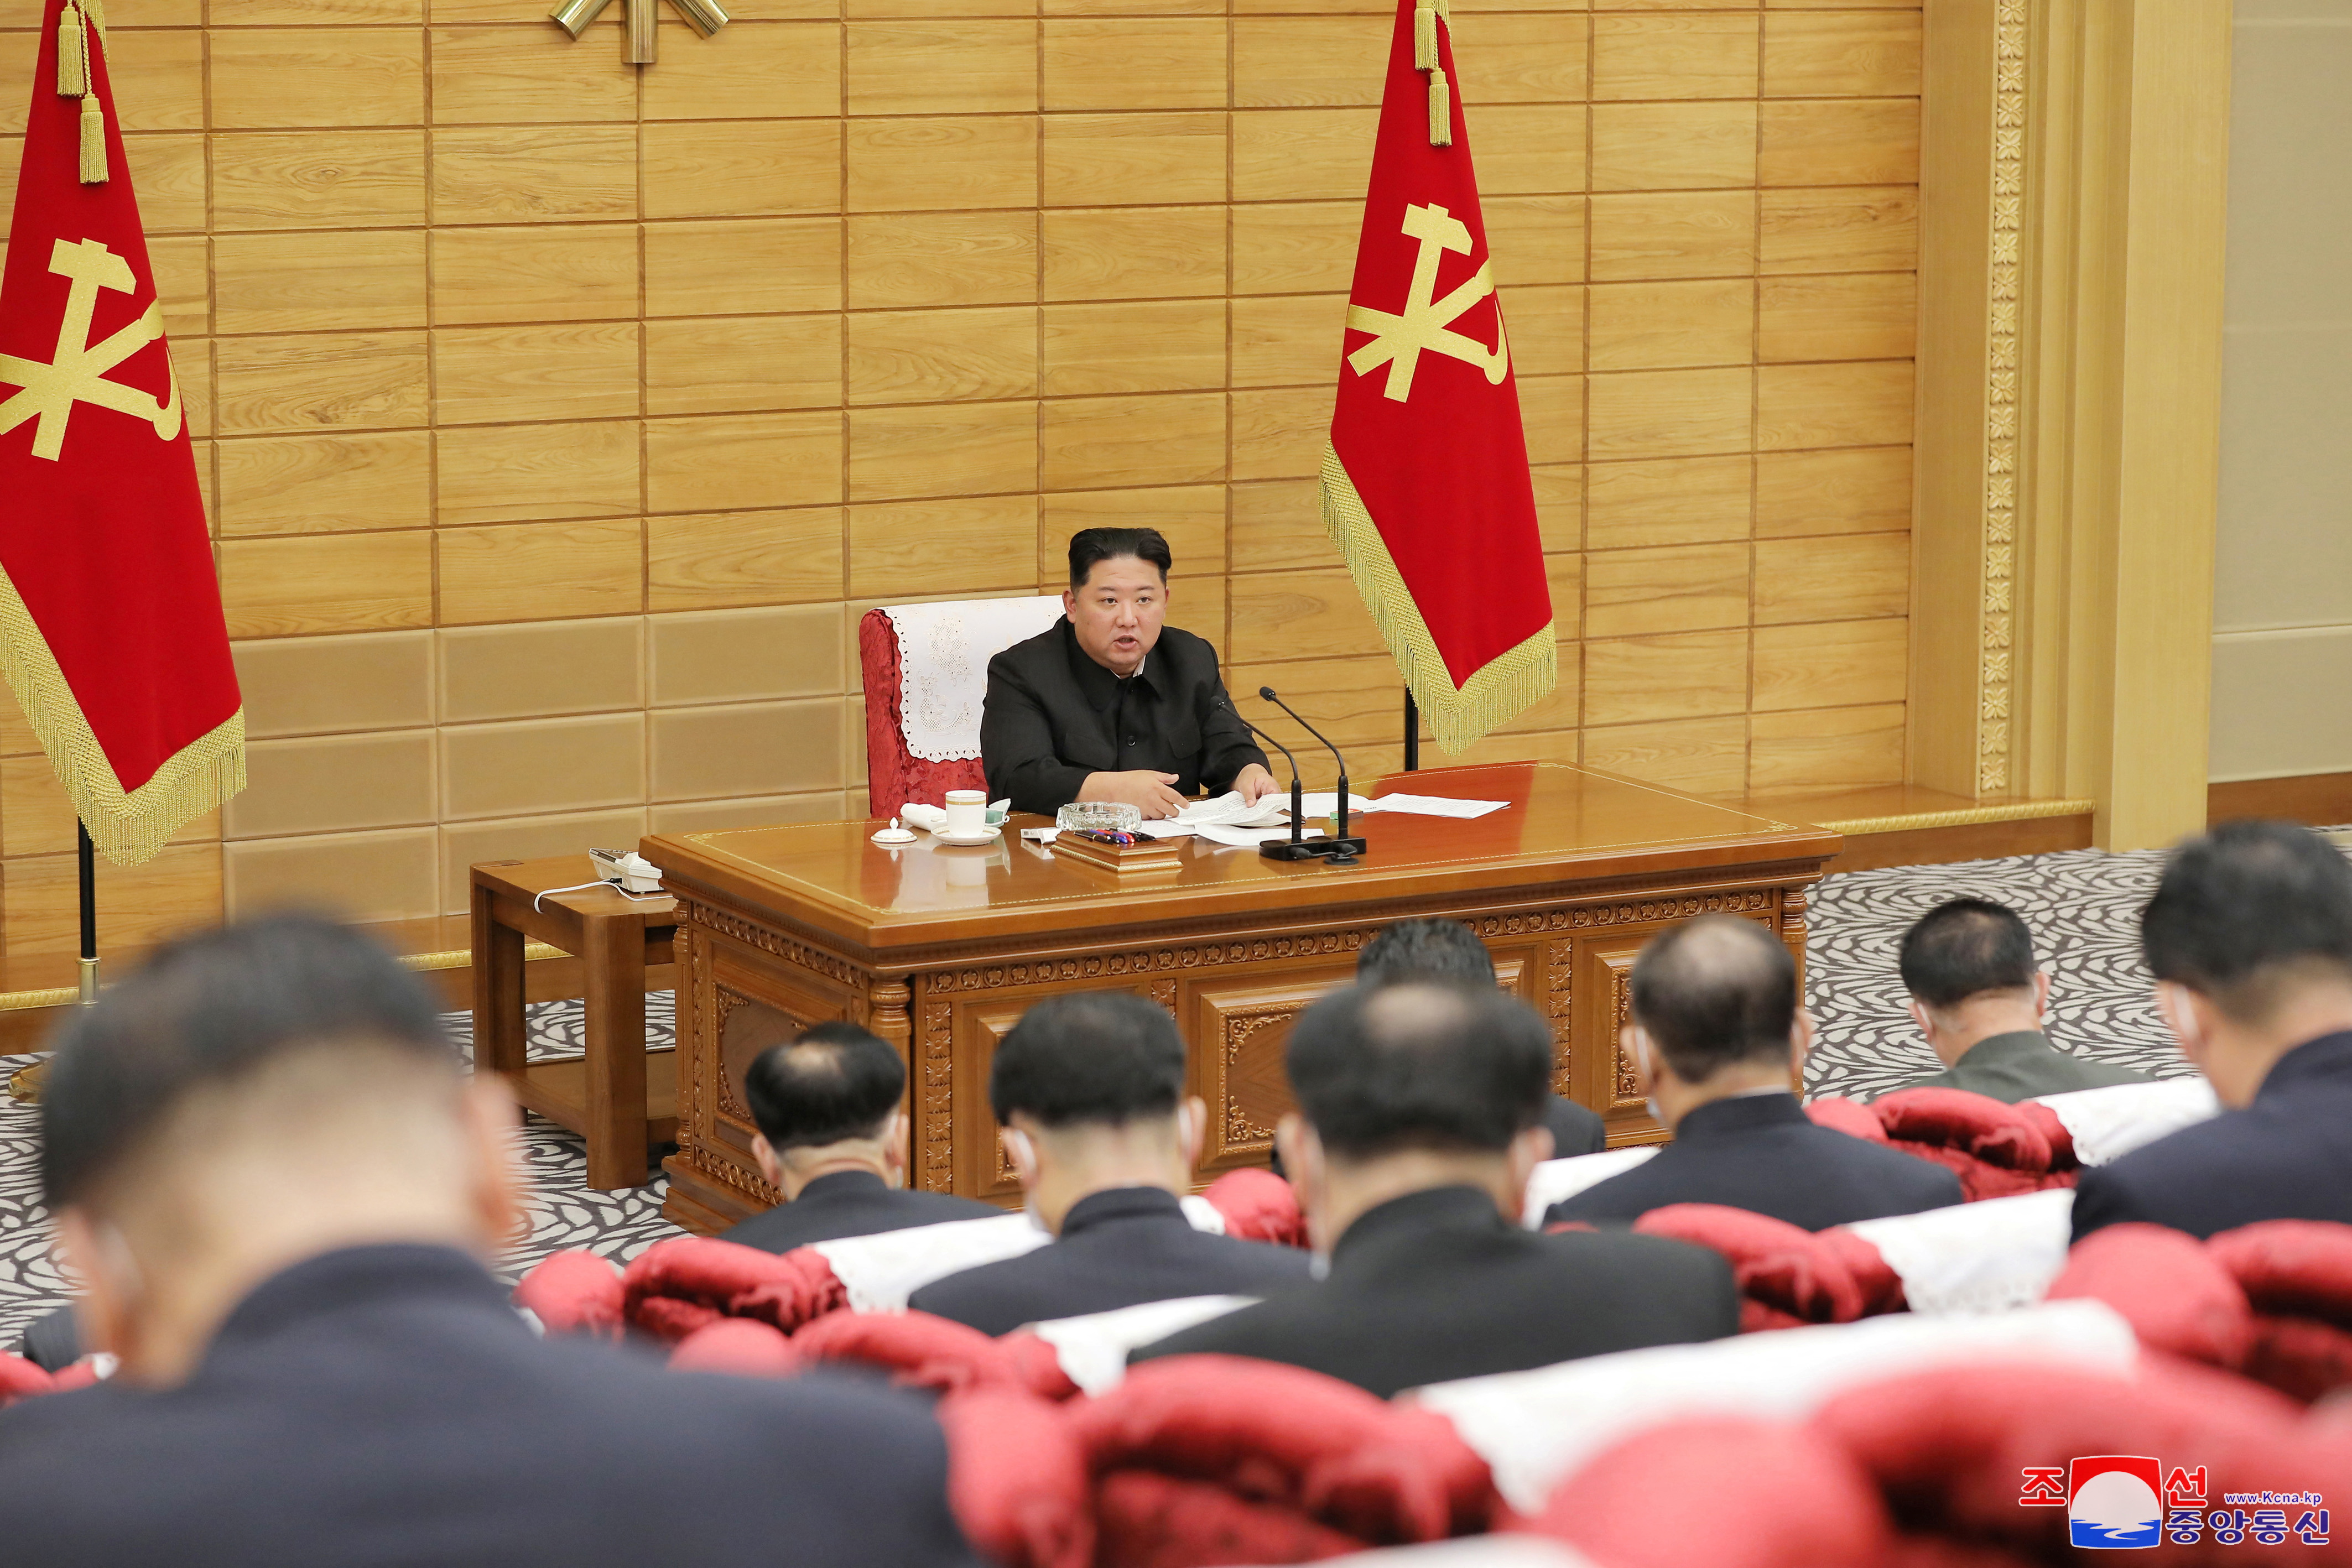 North Korean leader Kim Jong Un speaks at a politburo meeting of the ruling Workers' Party to inspect the country's antivirus efforts against the coronavirus disease (COVID-19) pandemic